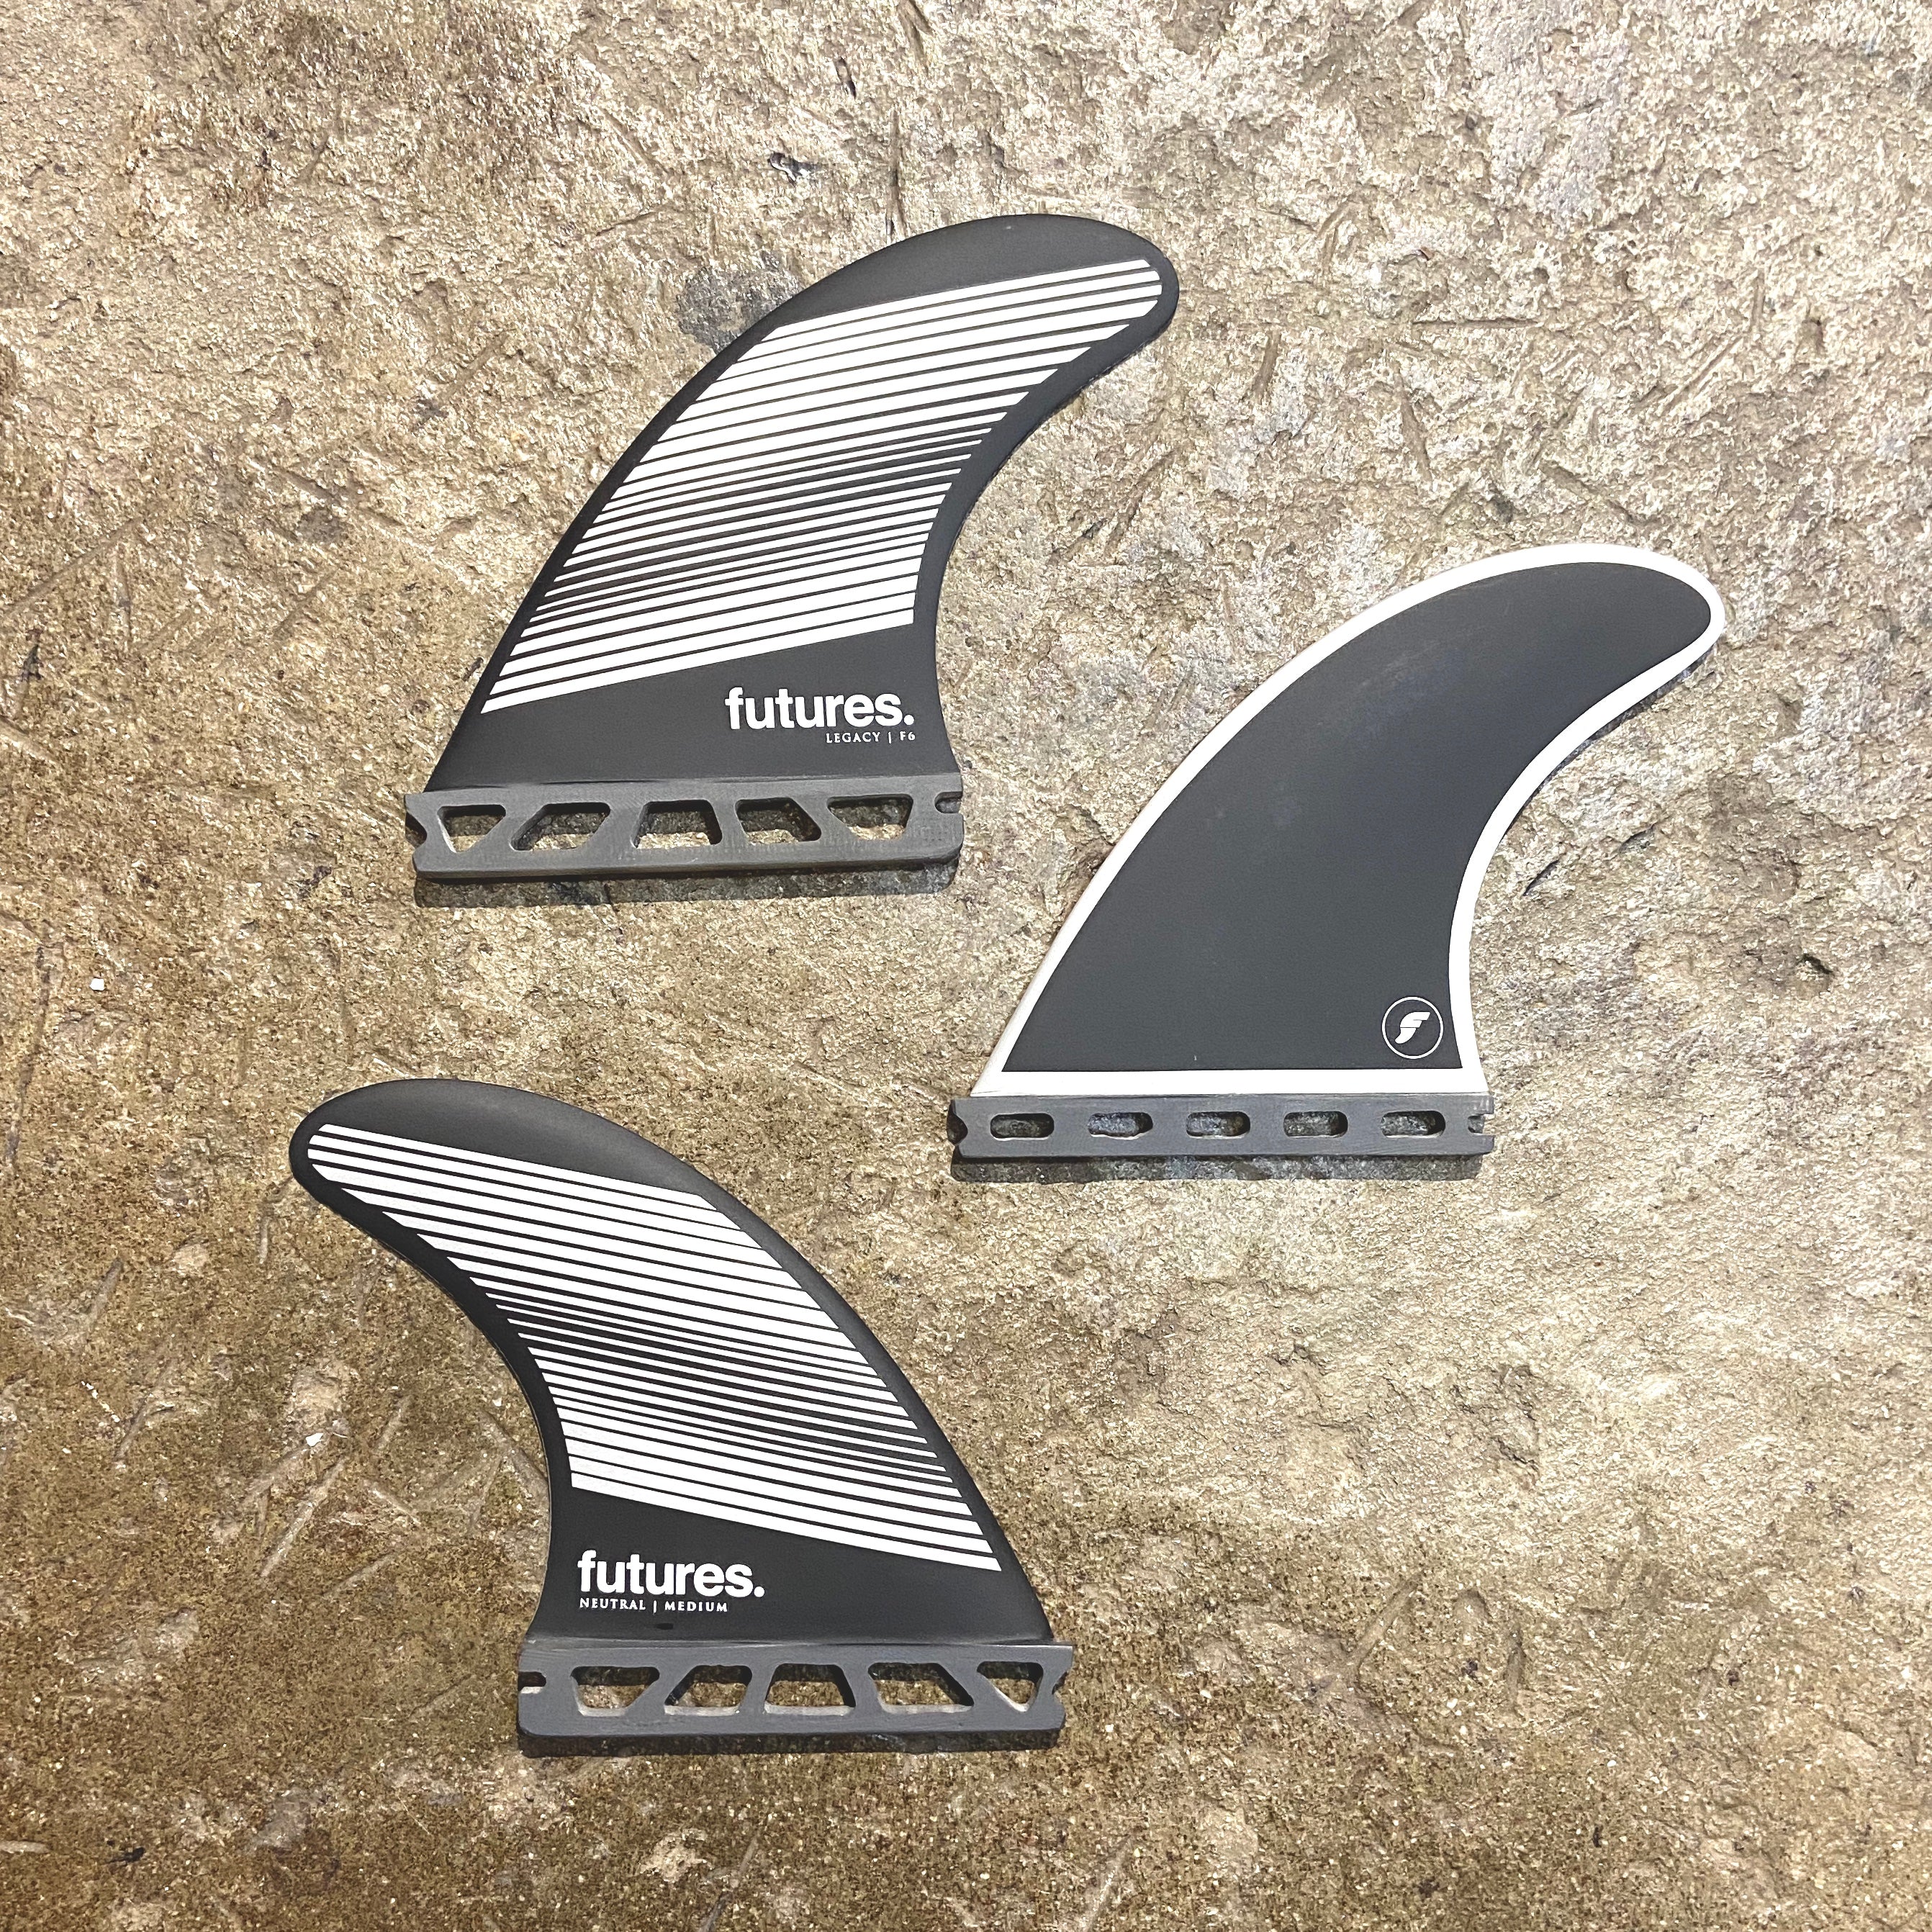 Buy futures F6 LEGACY fins at Keep it simple surf (KISS) Surf ...